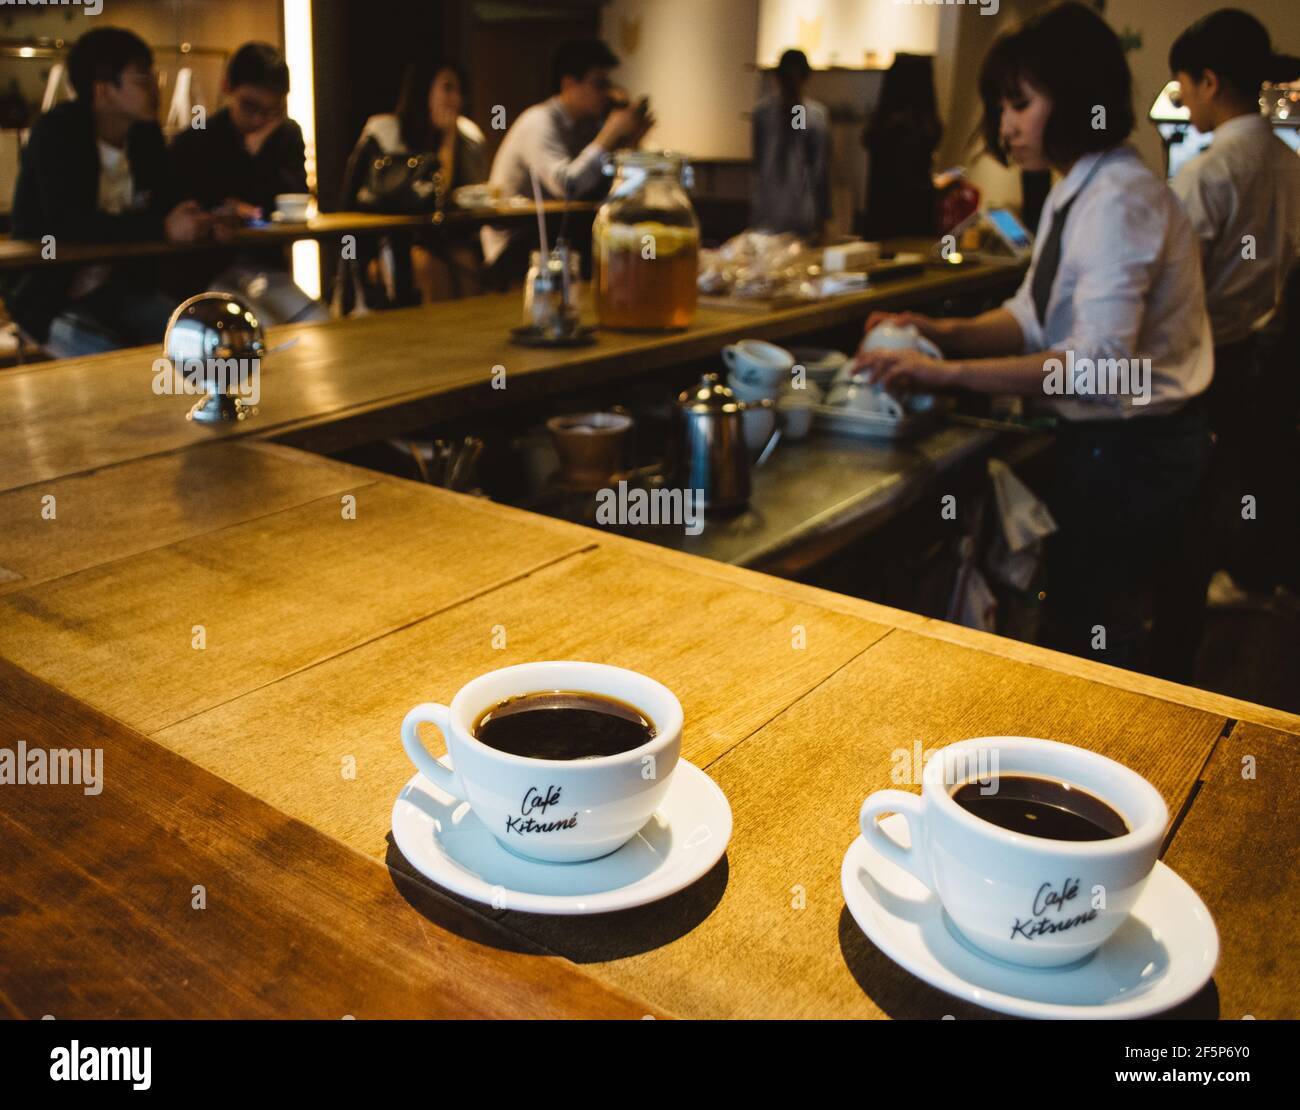 https://c8.alamy.com/comp/2F5P6Y0/tokyo-japan-two-cups-of-coffee-at-cafe-kitsune-located-near-omotesand-and-aoyama-interior-design-inspired-by-the-edo-period-2F5P6Y0.jpg